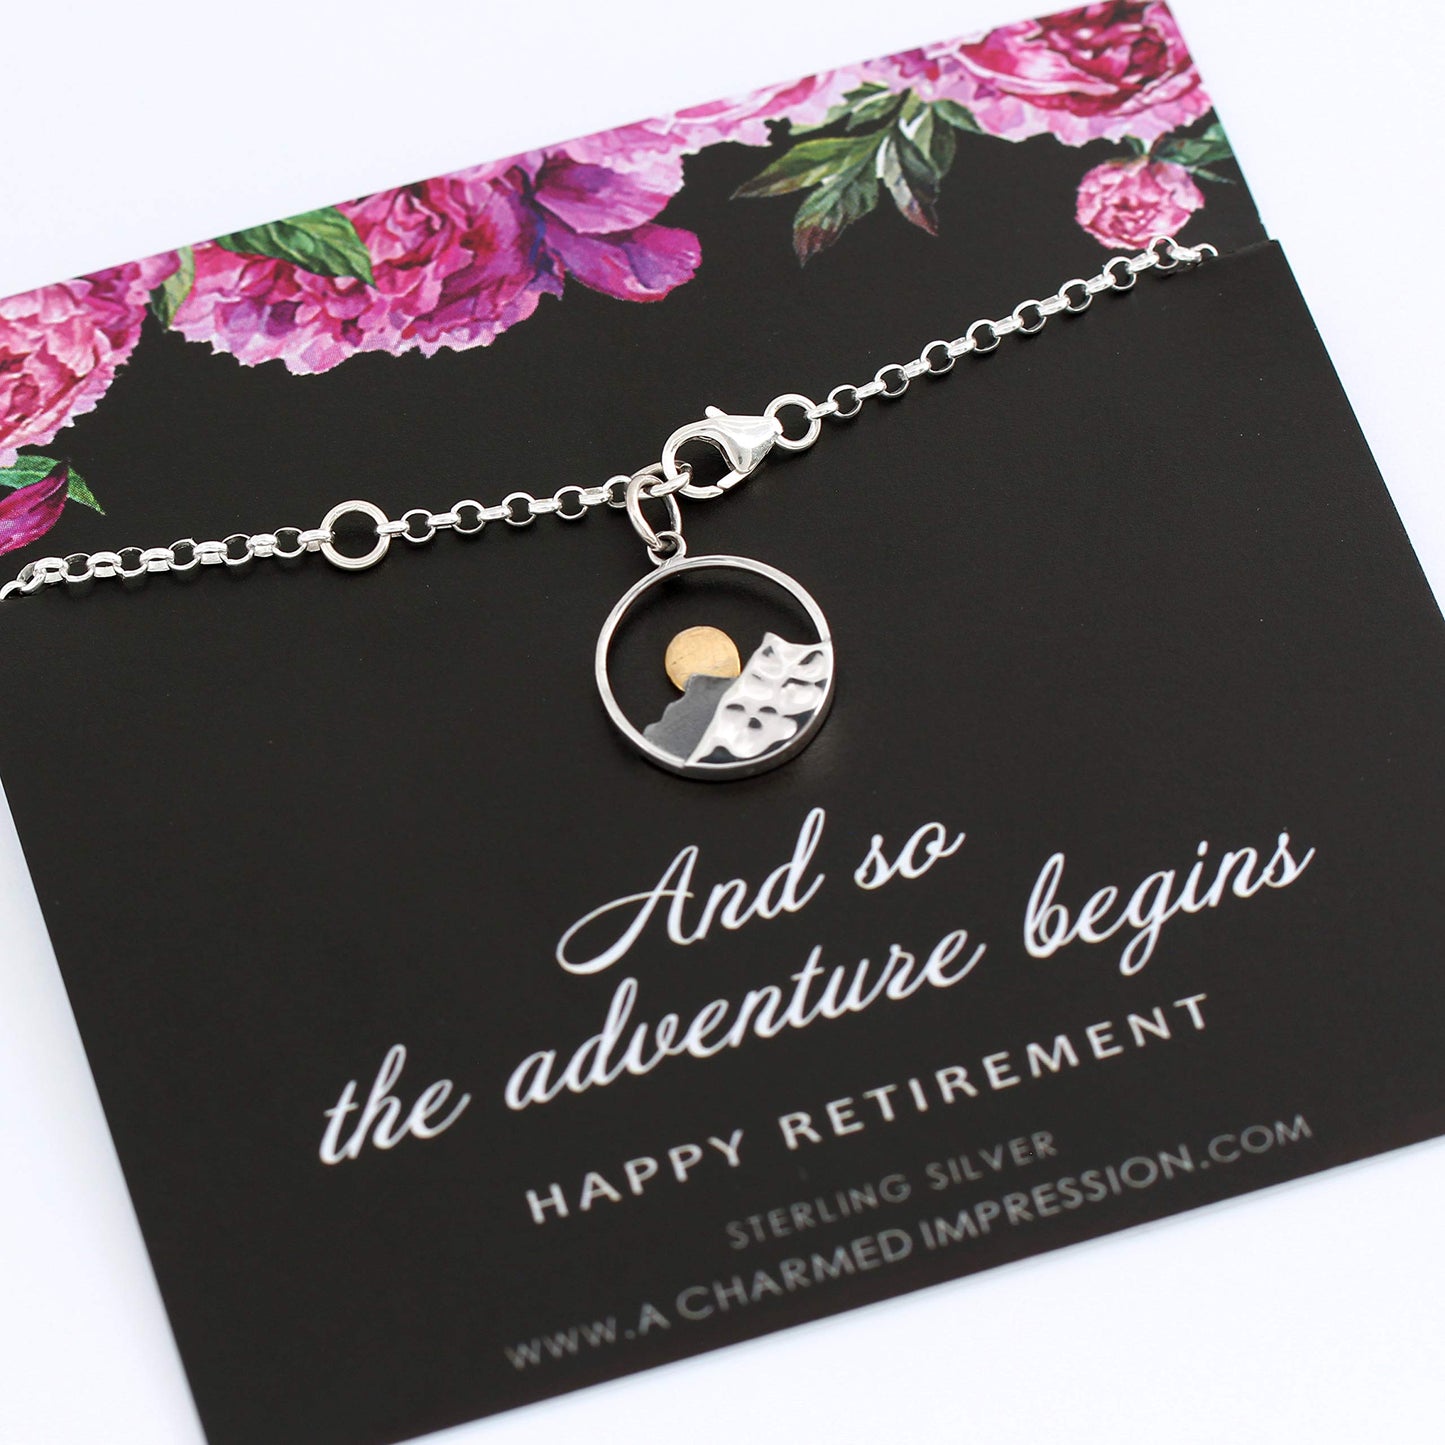 Coworker Leaving Gifts for Women • Retirement Gift • Sterling Silver • Sun & Mountain Charm Bracelet • Service Appreciation Jewelry • Friend Teacher Nurse Work Colleague • and so The Adventure Begins